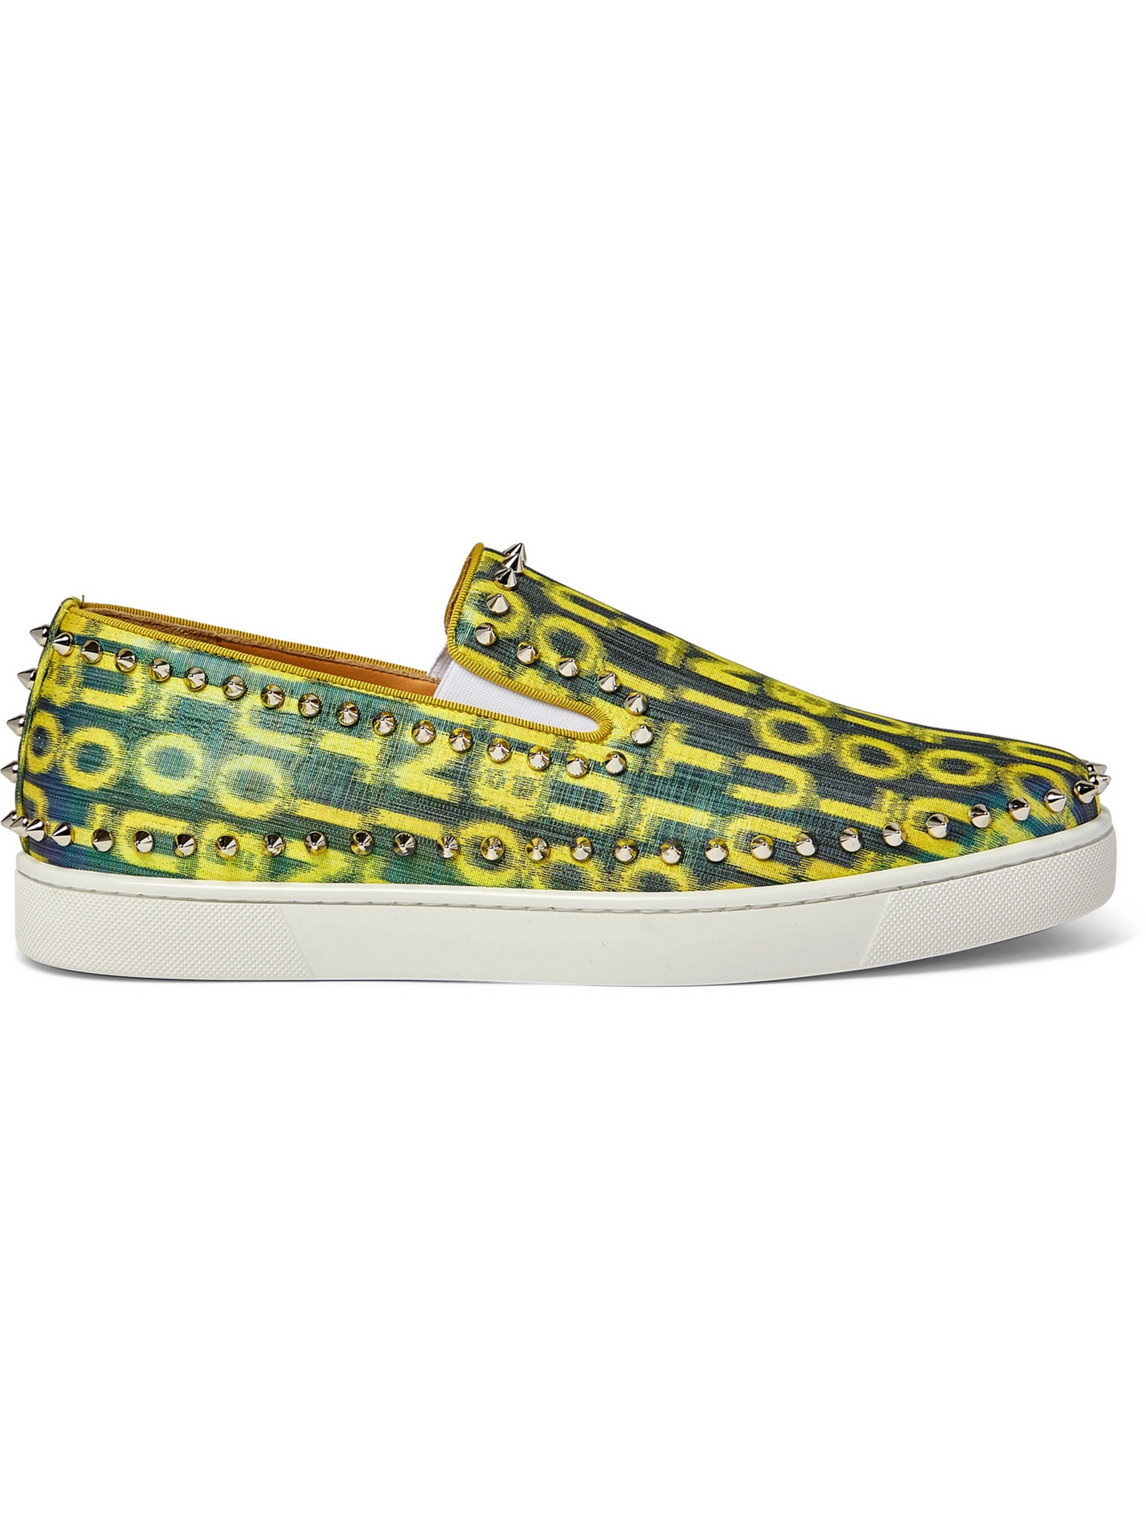 Pik Boat Spiked Glittered Logo-Print Canvas Slip-On Sneakers